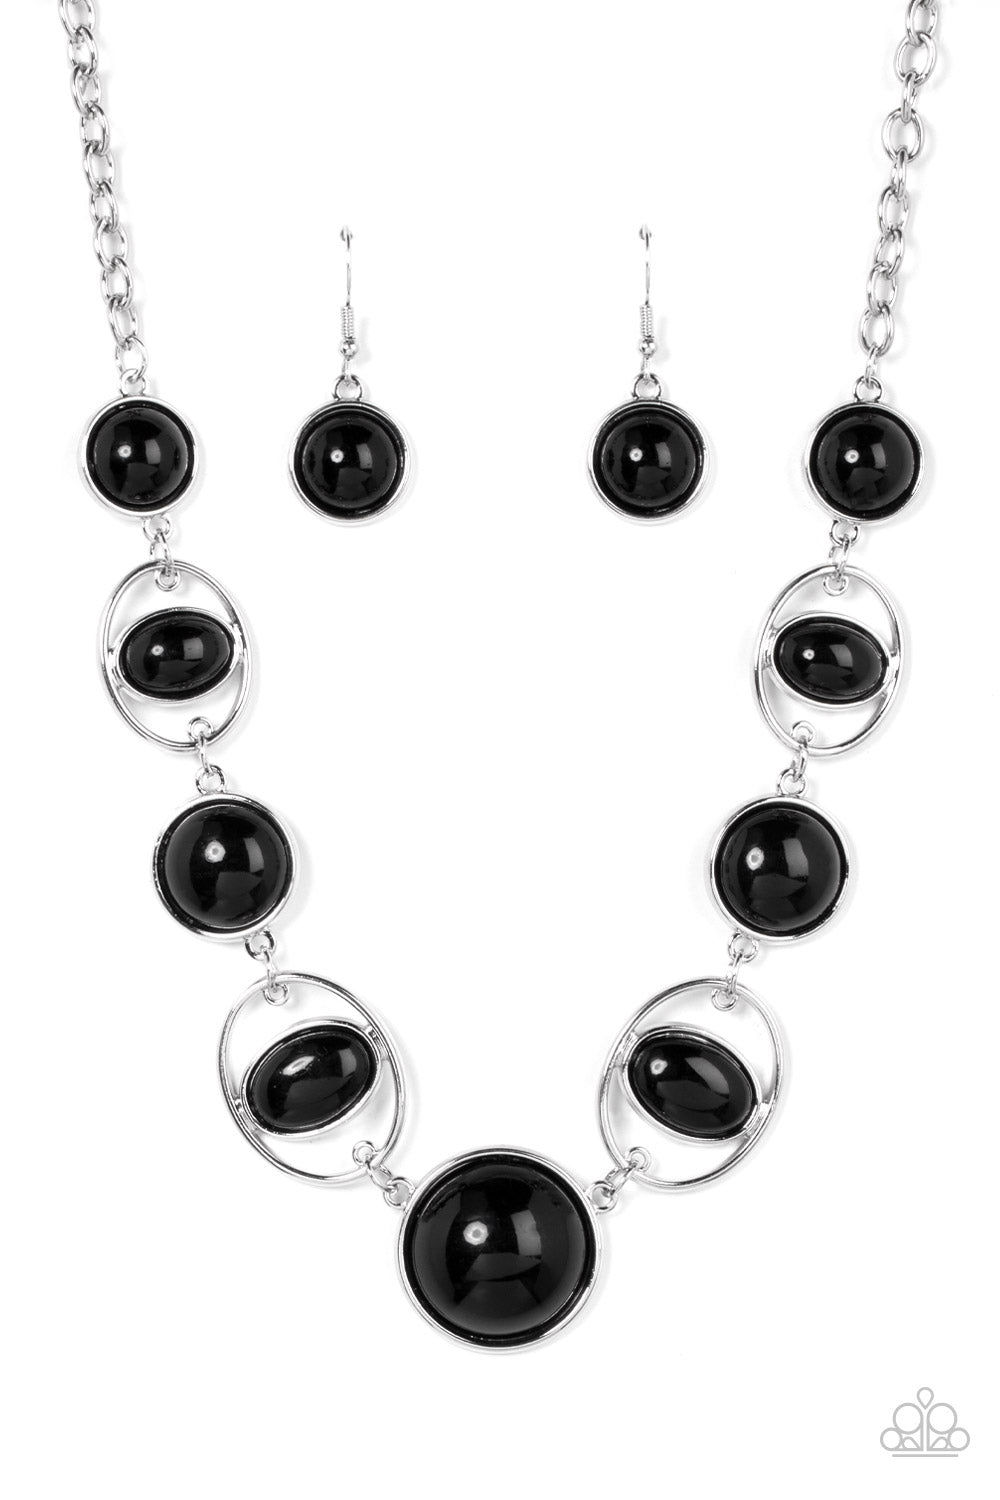 Eye of the BEAD-holder - Black Bead Necklace - Paparazzi Accessories